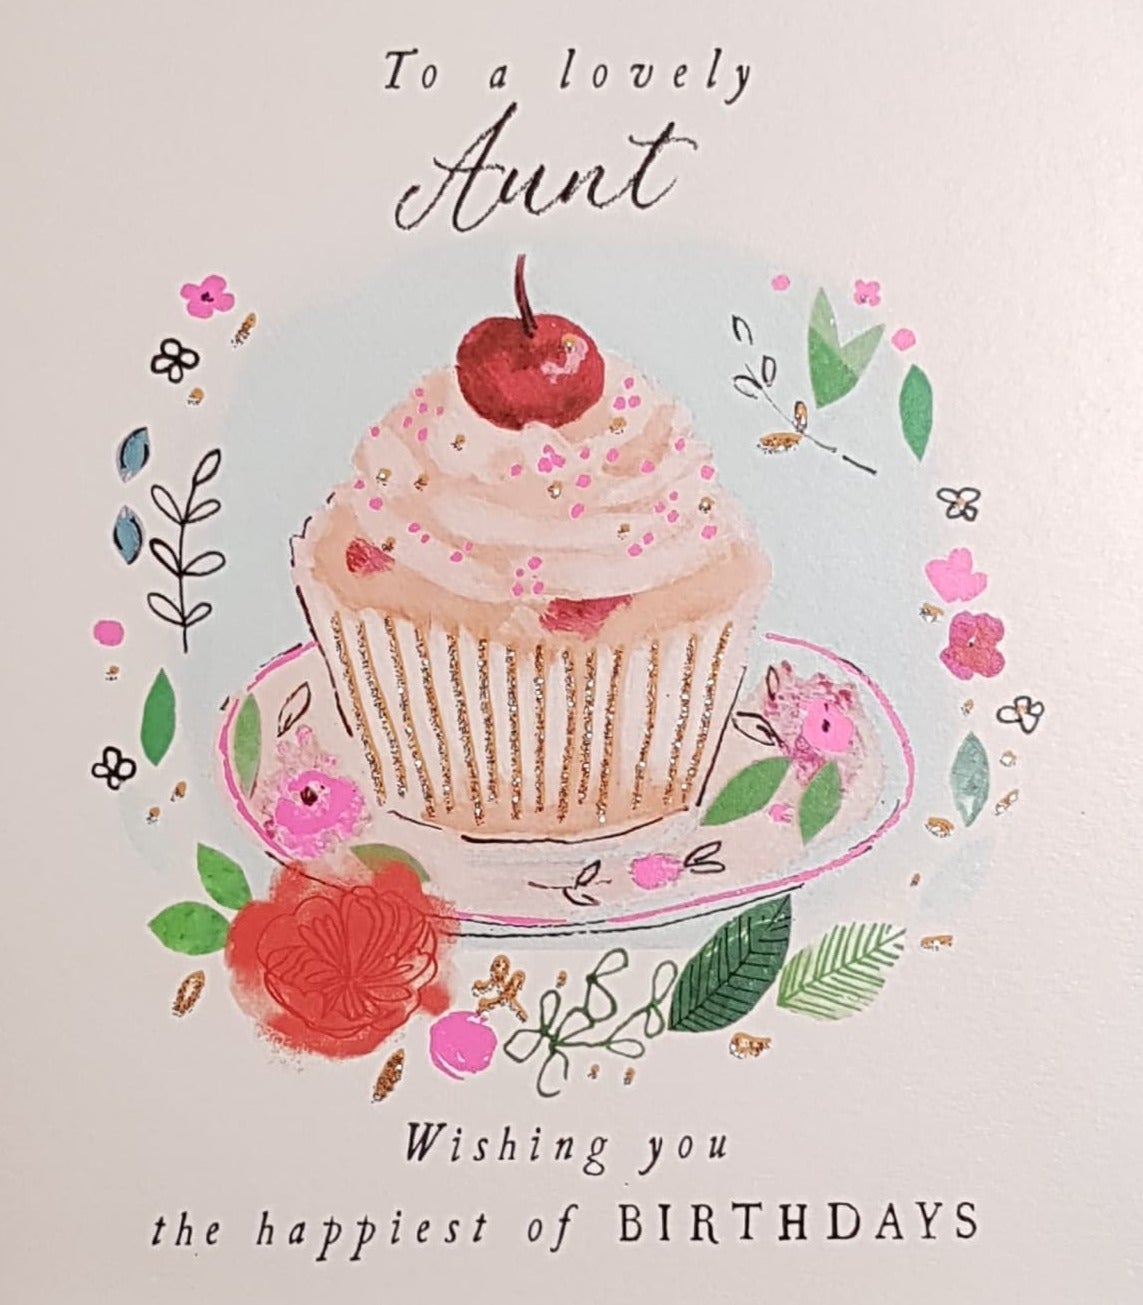 Birthday Card - Aunt / A Cupcake On Saucer With Cherry On Top